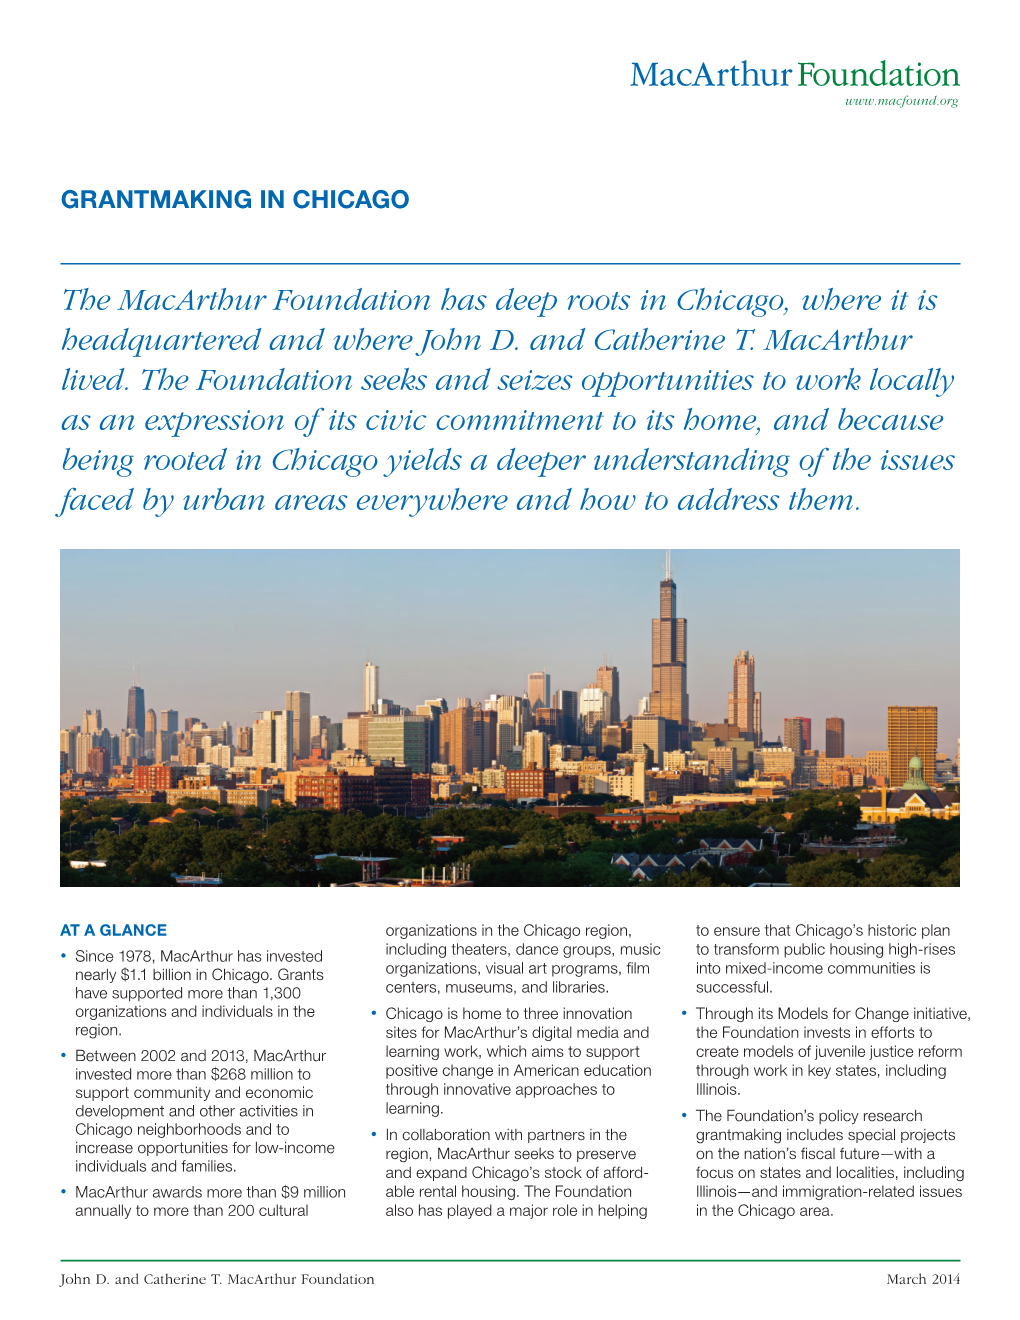 The Macarthur Foundation Has Deep Roots in Chicago, Where It Is Headquartered and Where John D